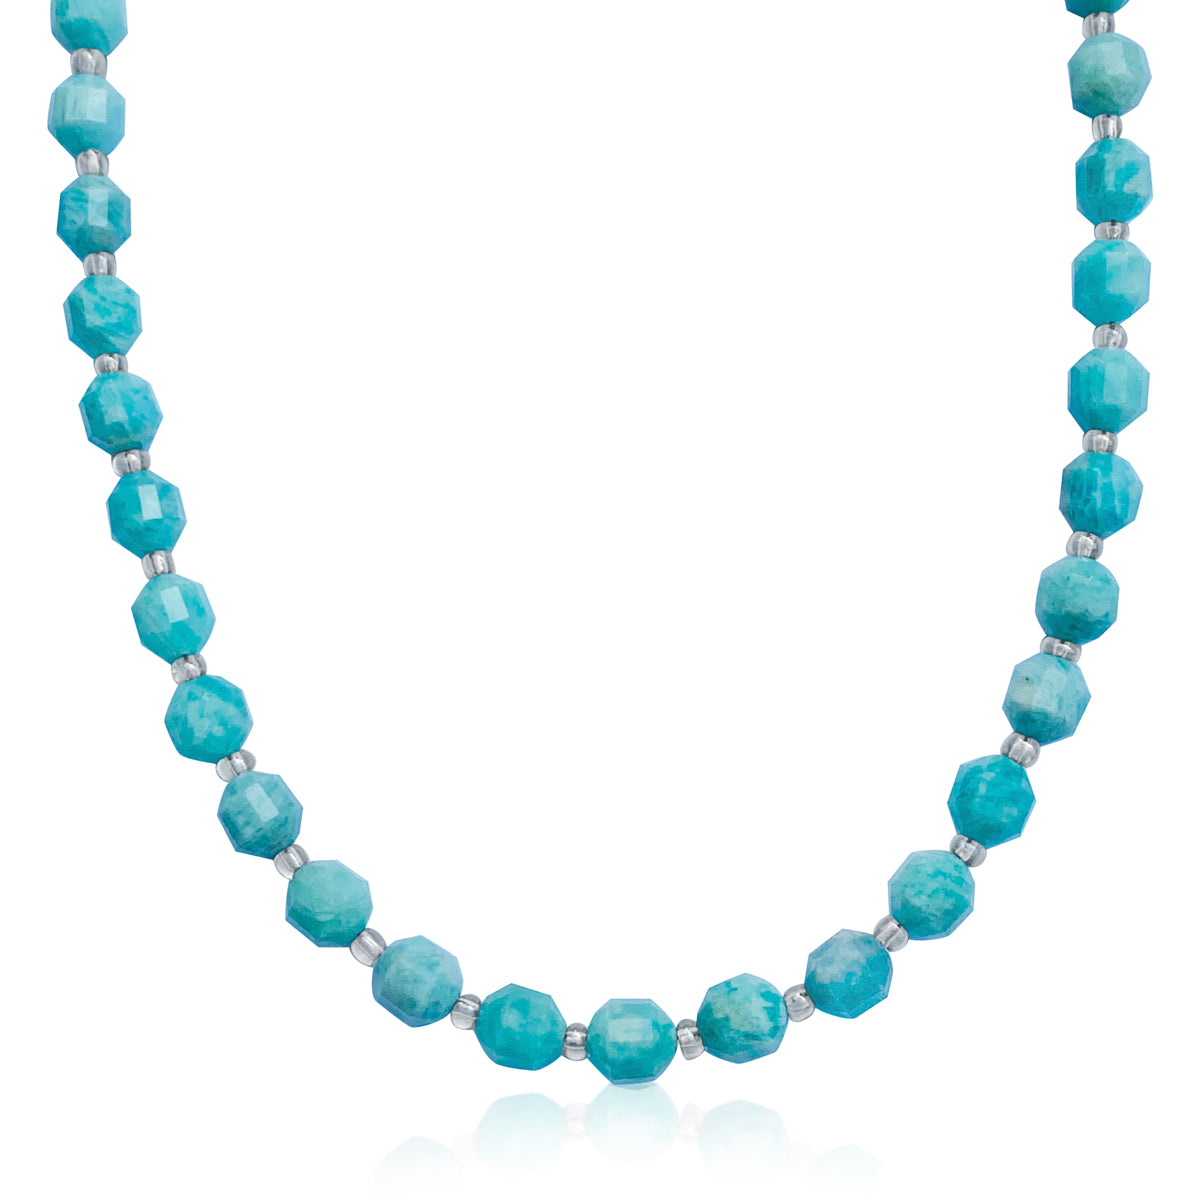 Premium Natural Amazonite Necklace for Courage and to Create a Feeling of Power Within You. Amazonite is called the Stone of Courage and the Stone of Truth.. Amazonite Jewelry, Amazonite Healing Power, Amazon Women Jewelry, Amazonite Stone Power, Amazonite for Courage.